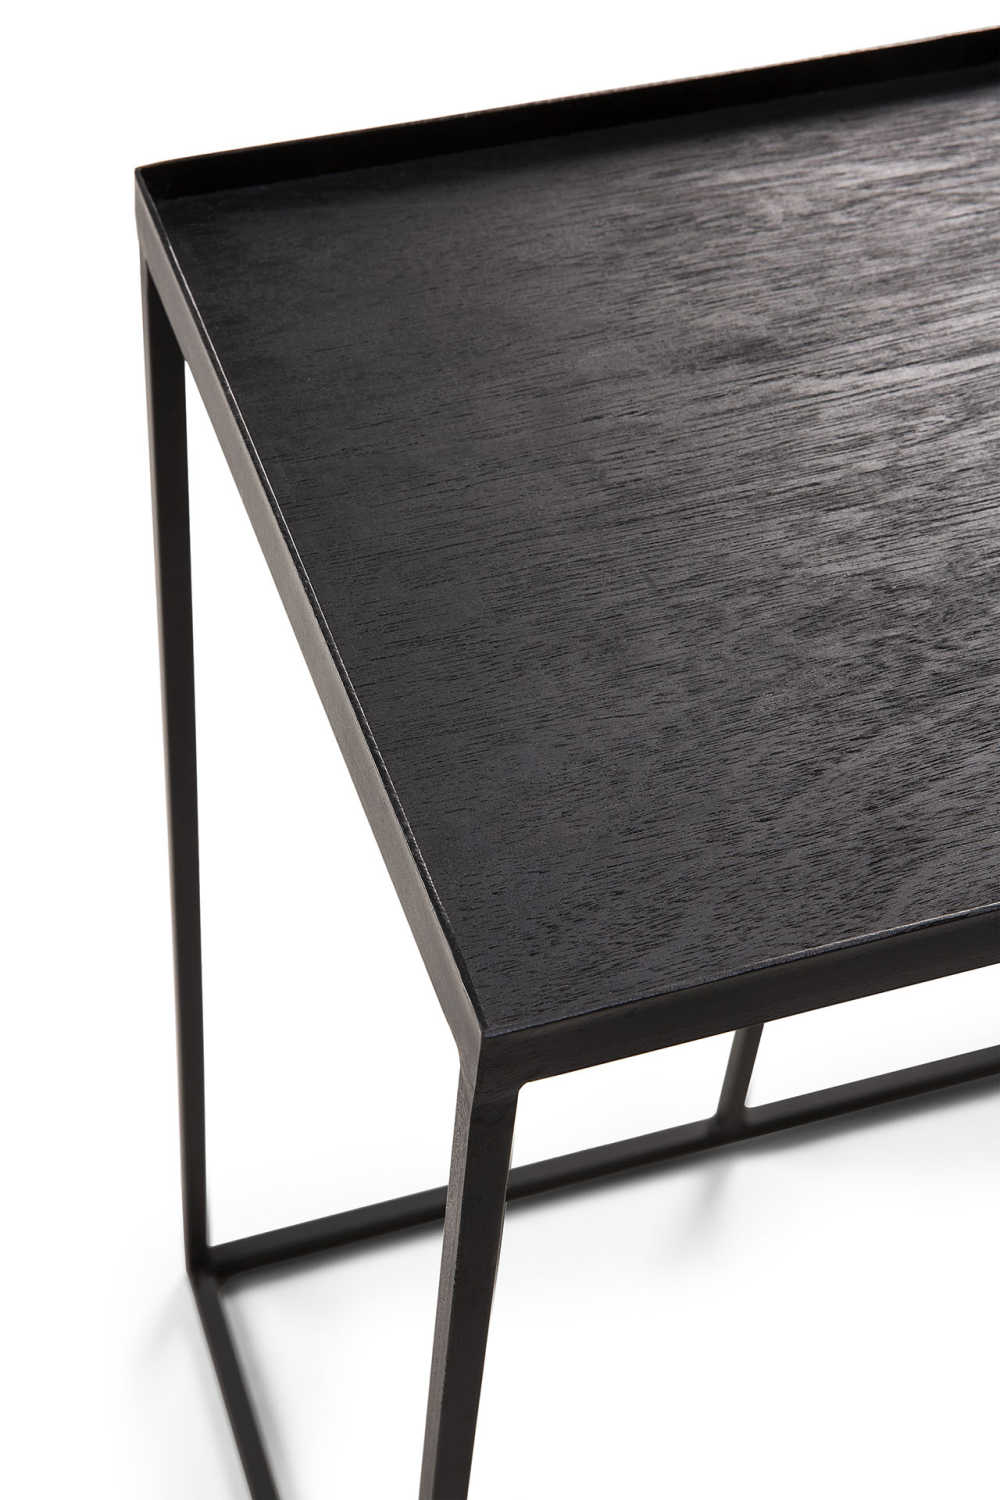 Black C-Shaped Side Table | Ethnicaft Tray | Ethnicraft